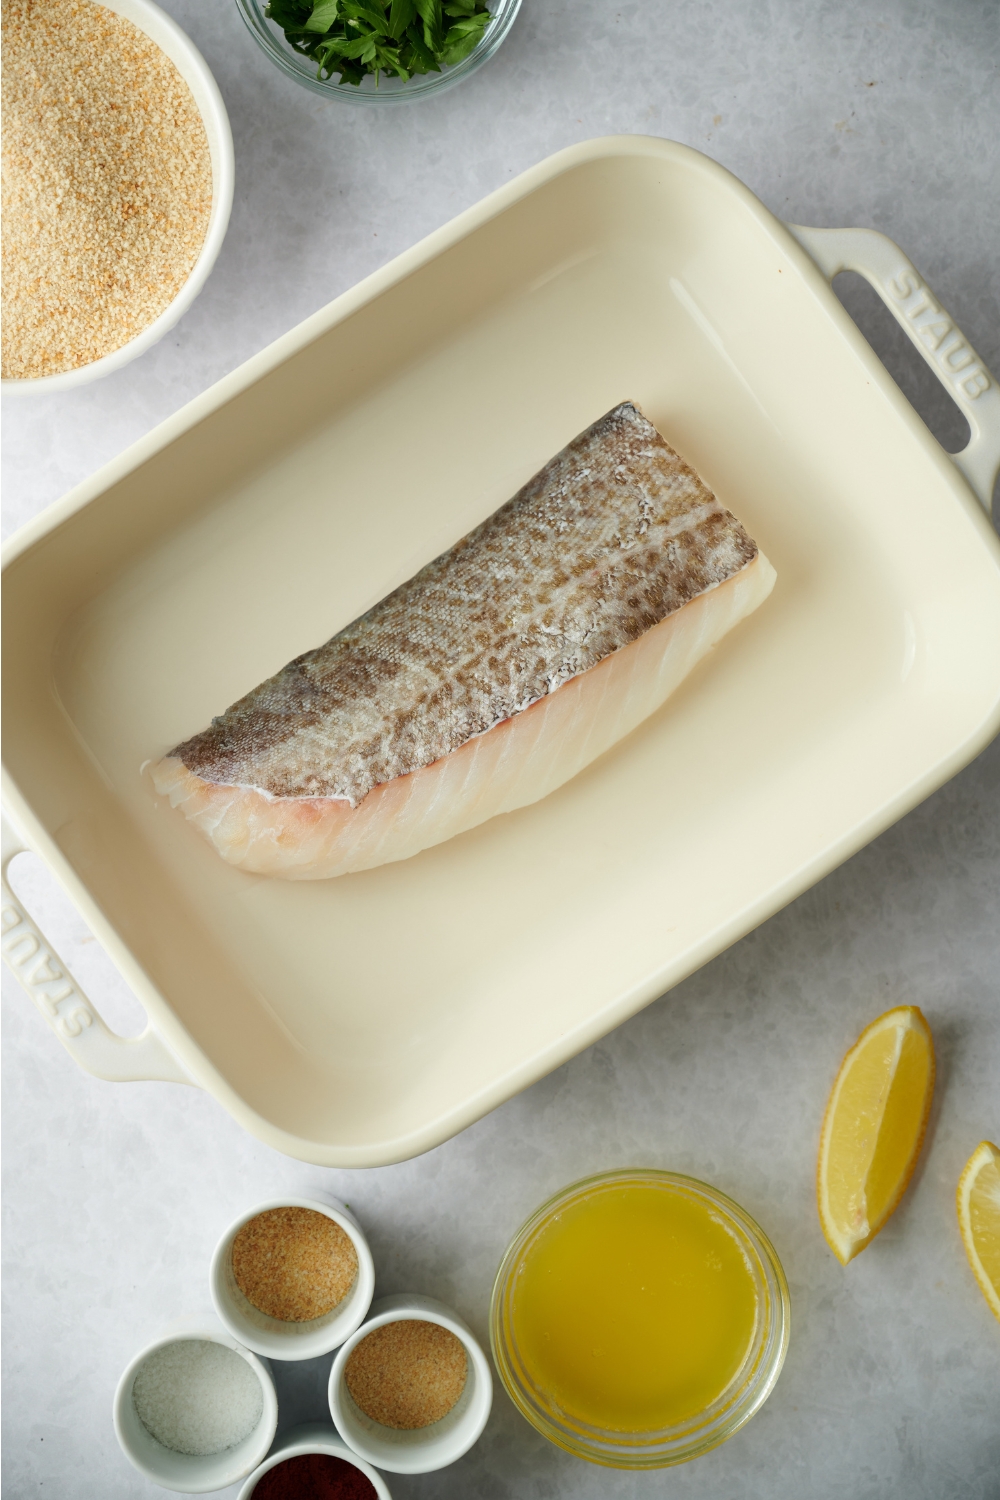 A haddock fillet in a baking dish.